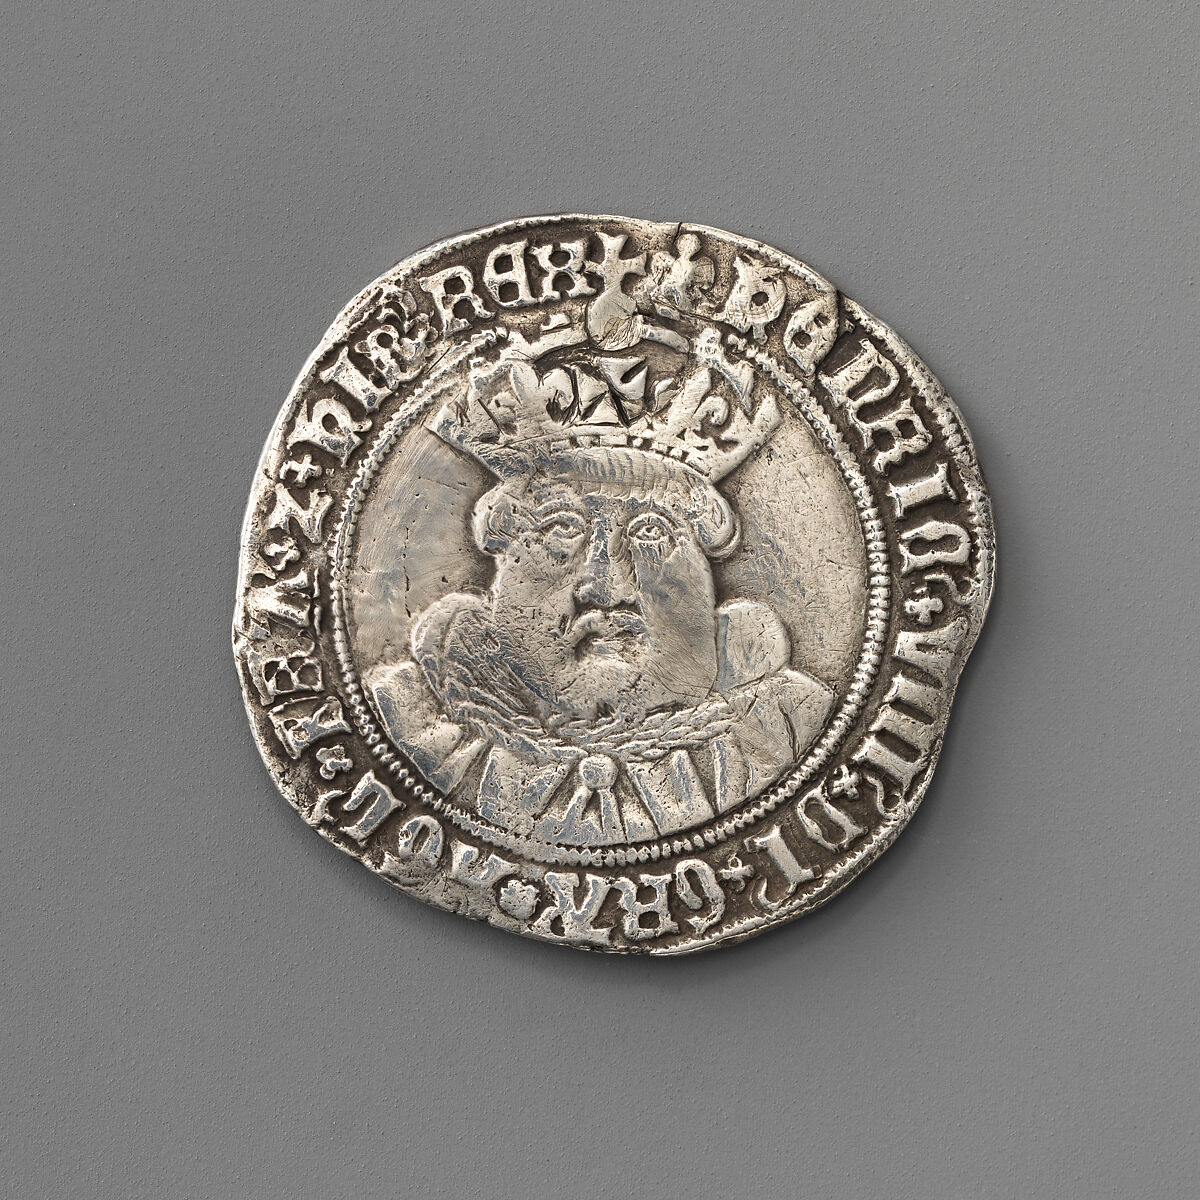 Testoon of Henry VIII (third coinage), Silver